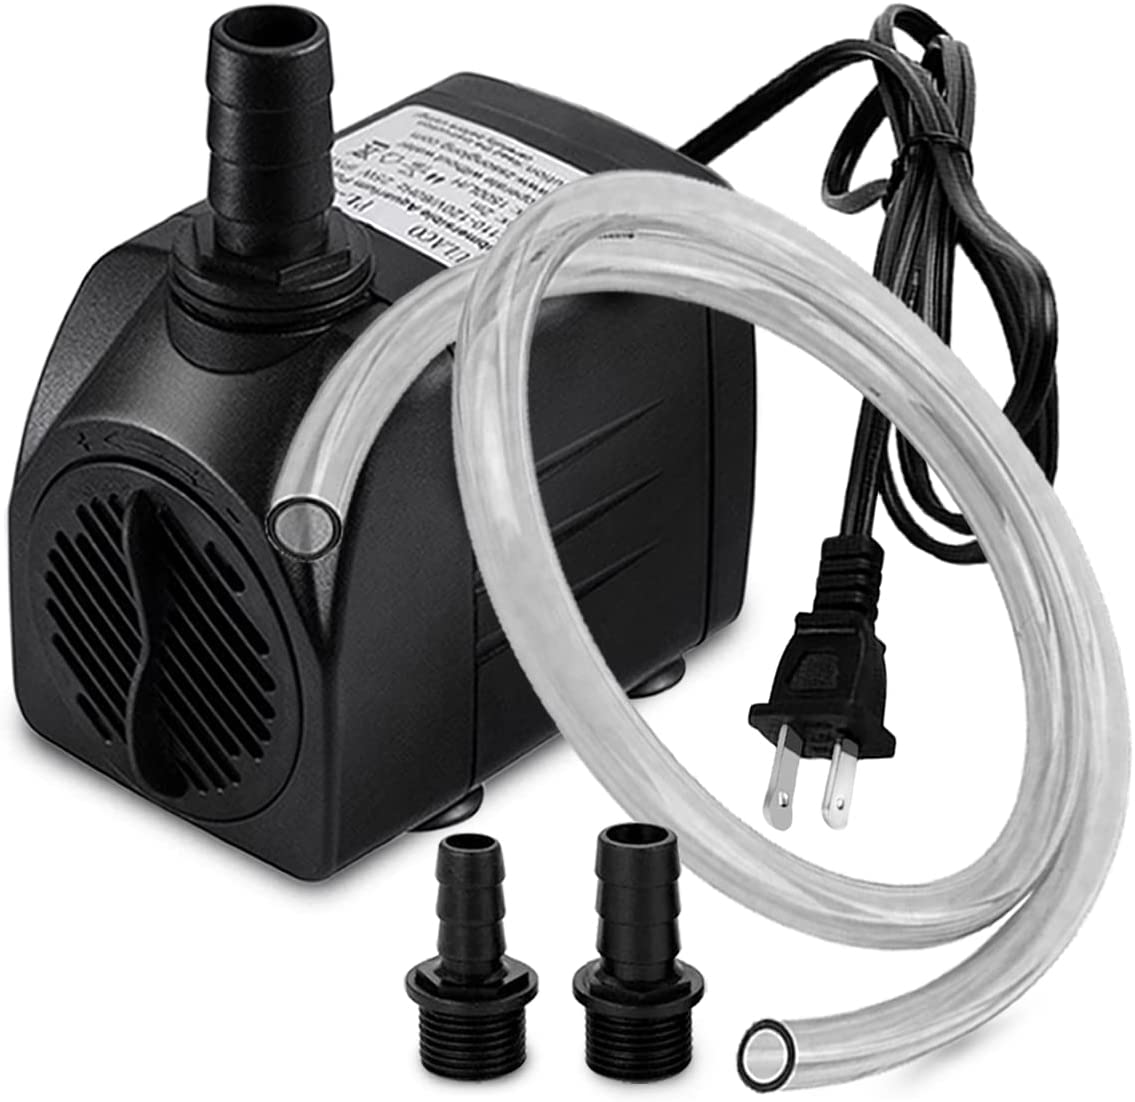 PULACO 400GPH Submersible Water Pump with 5 Ft Tubing, 25W Durable Fountain Water Pump for Pond Fountain, Aquariums Fish Tank, Statuary, Hydroponics Animals & Pet Supplies > Pet Supplies > Fish Supplies > Aquarium & Pond Tubing PULACO   